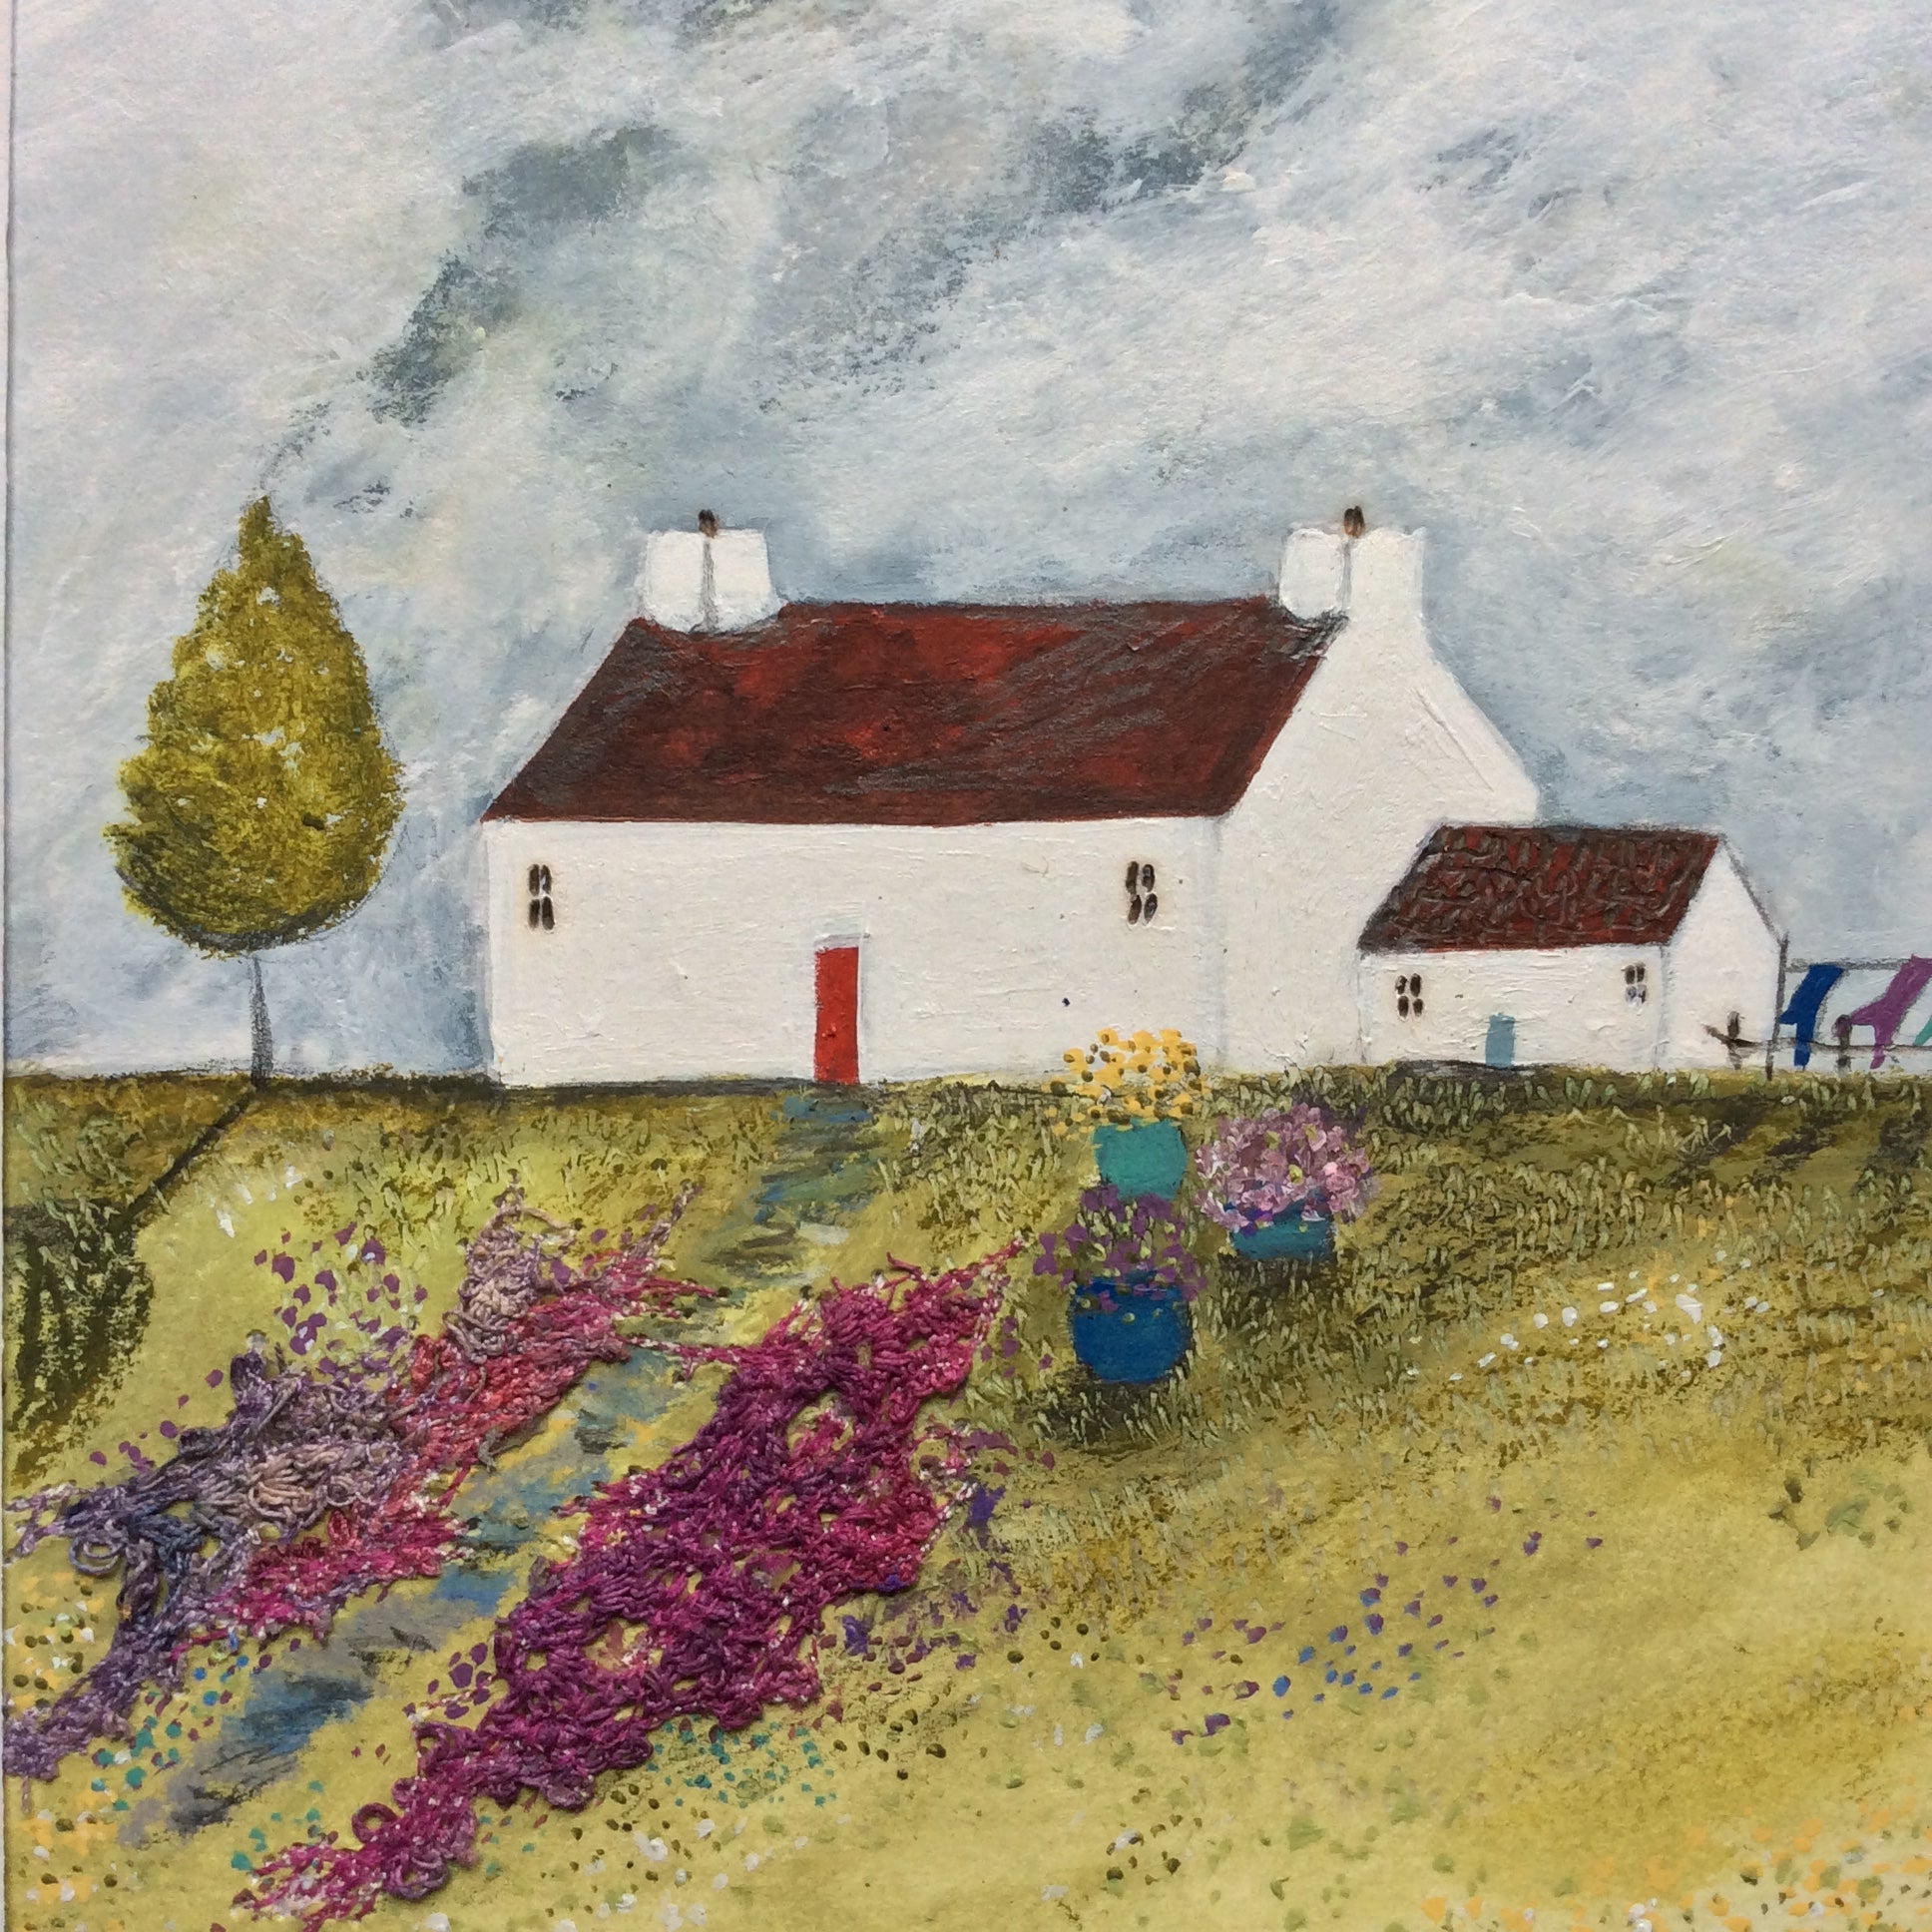 Mixed Media Art By Louise O'Hara - “A calm breeze blew from the West”